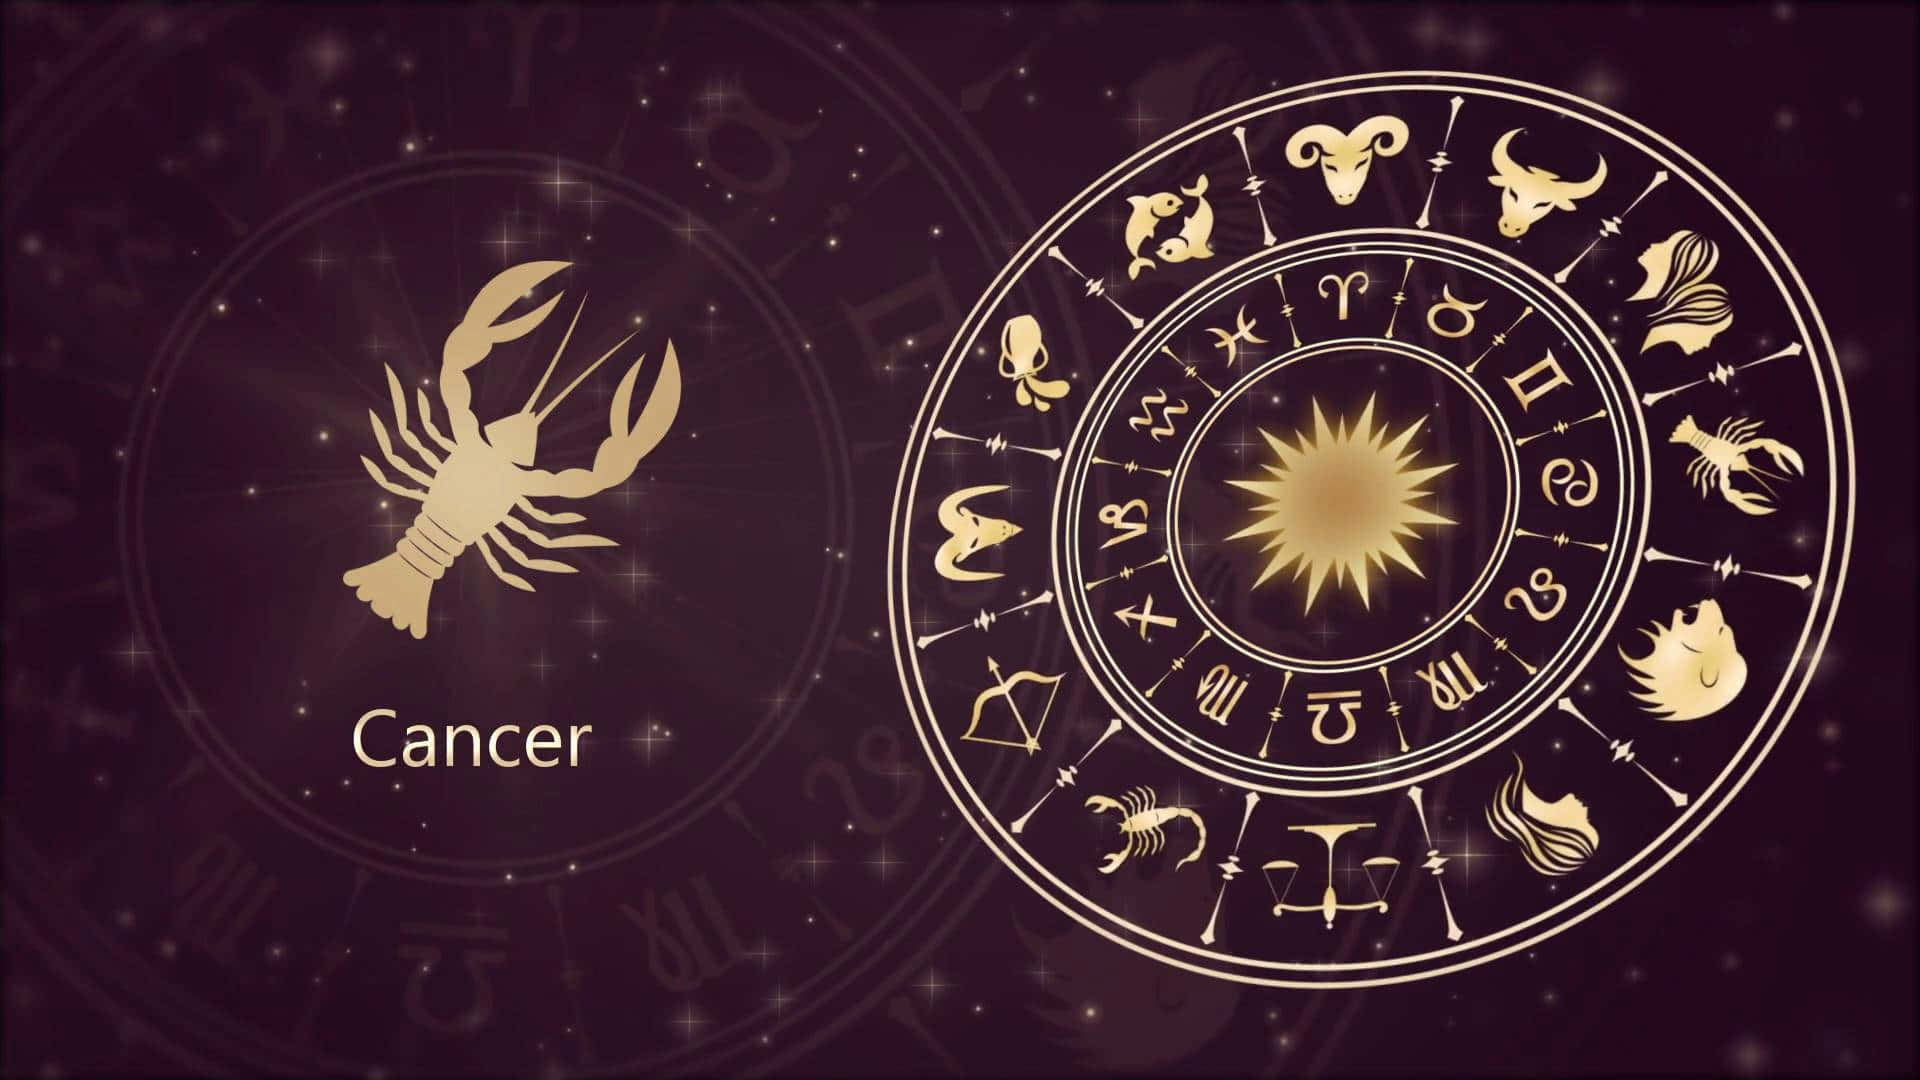 Cute Cancer Zodiac Sign Lobster And Wheel Wallpaper